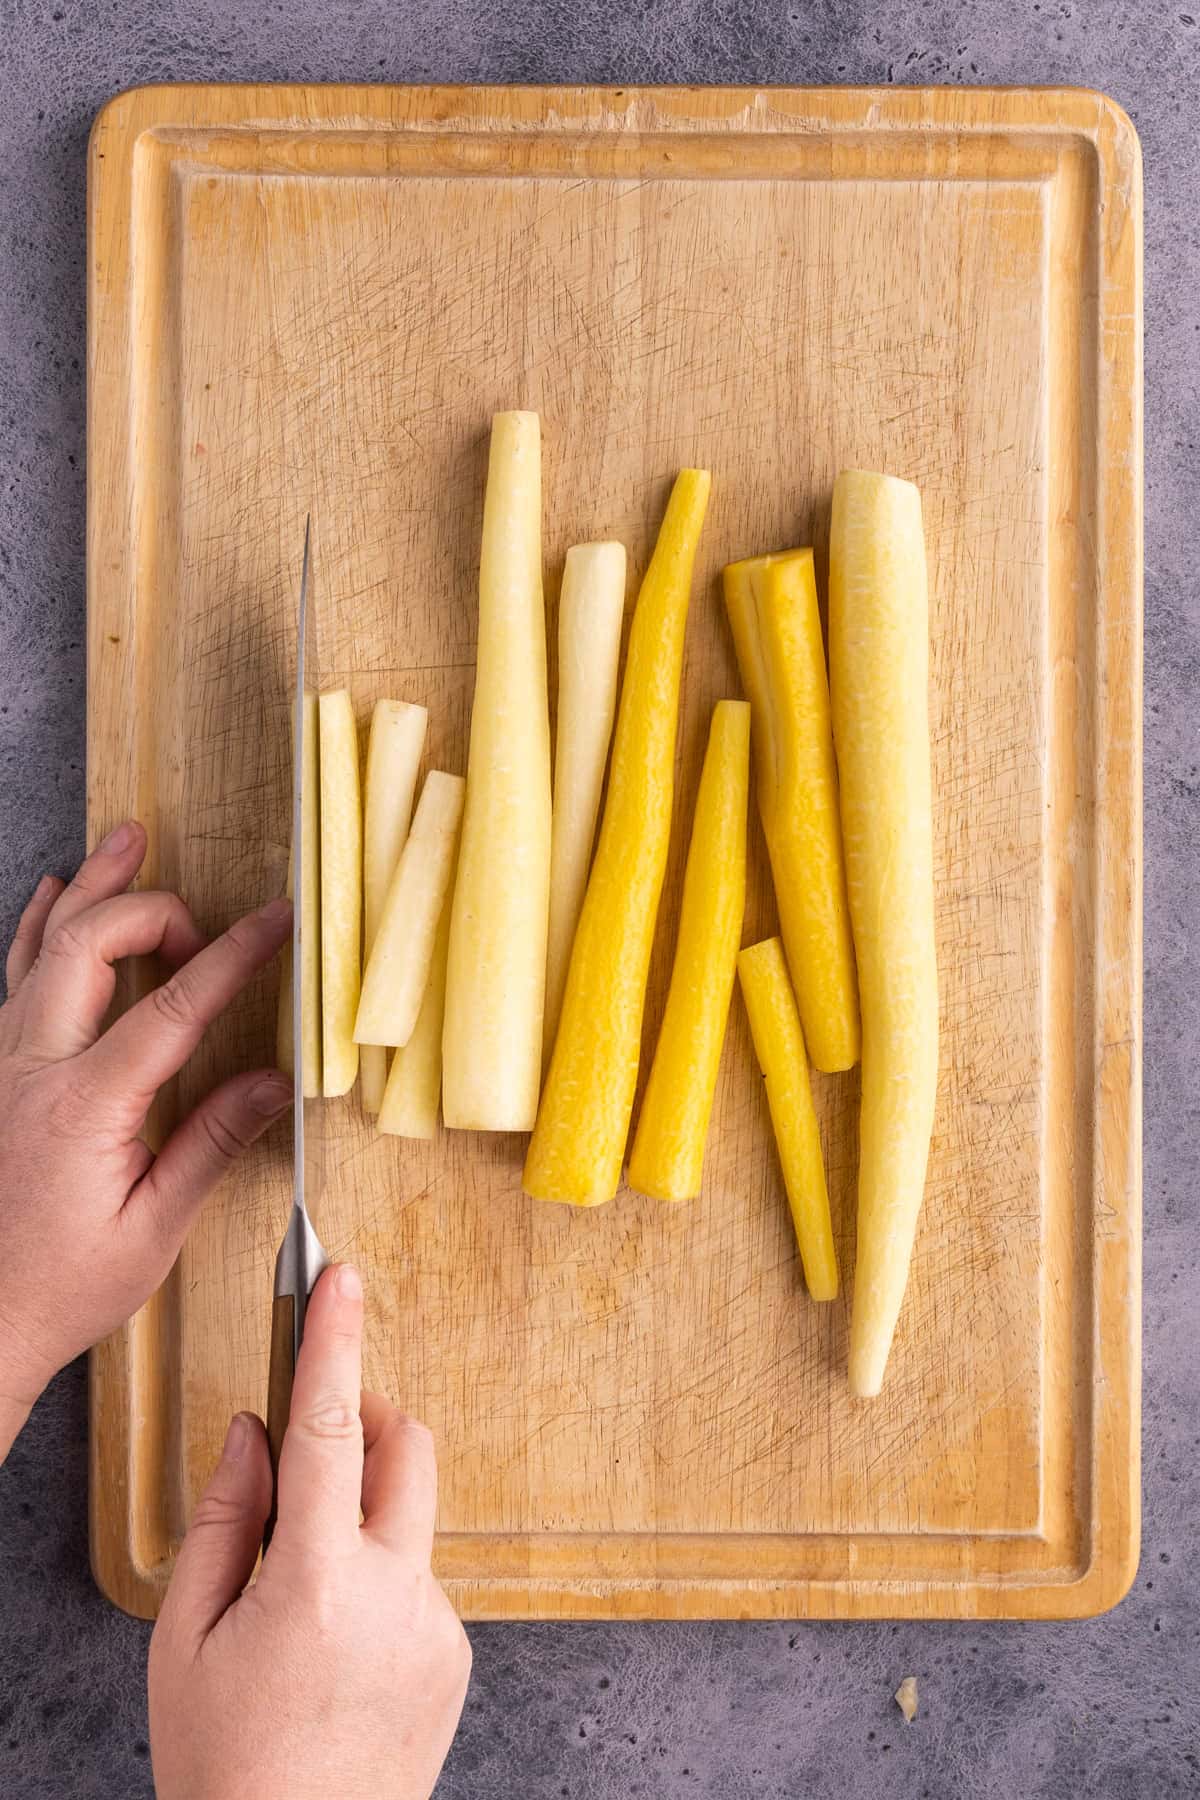 Slicing white carrots